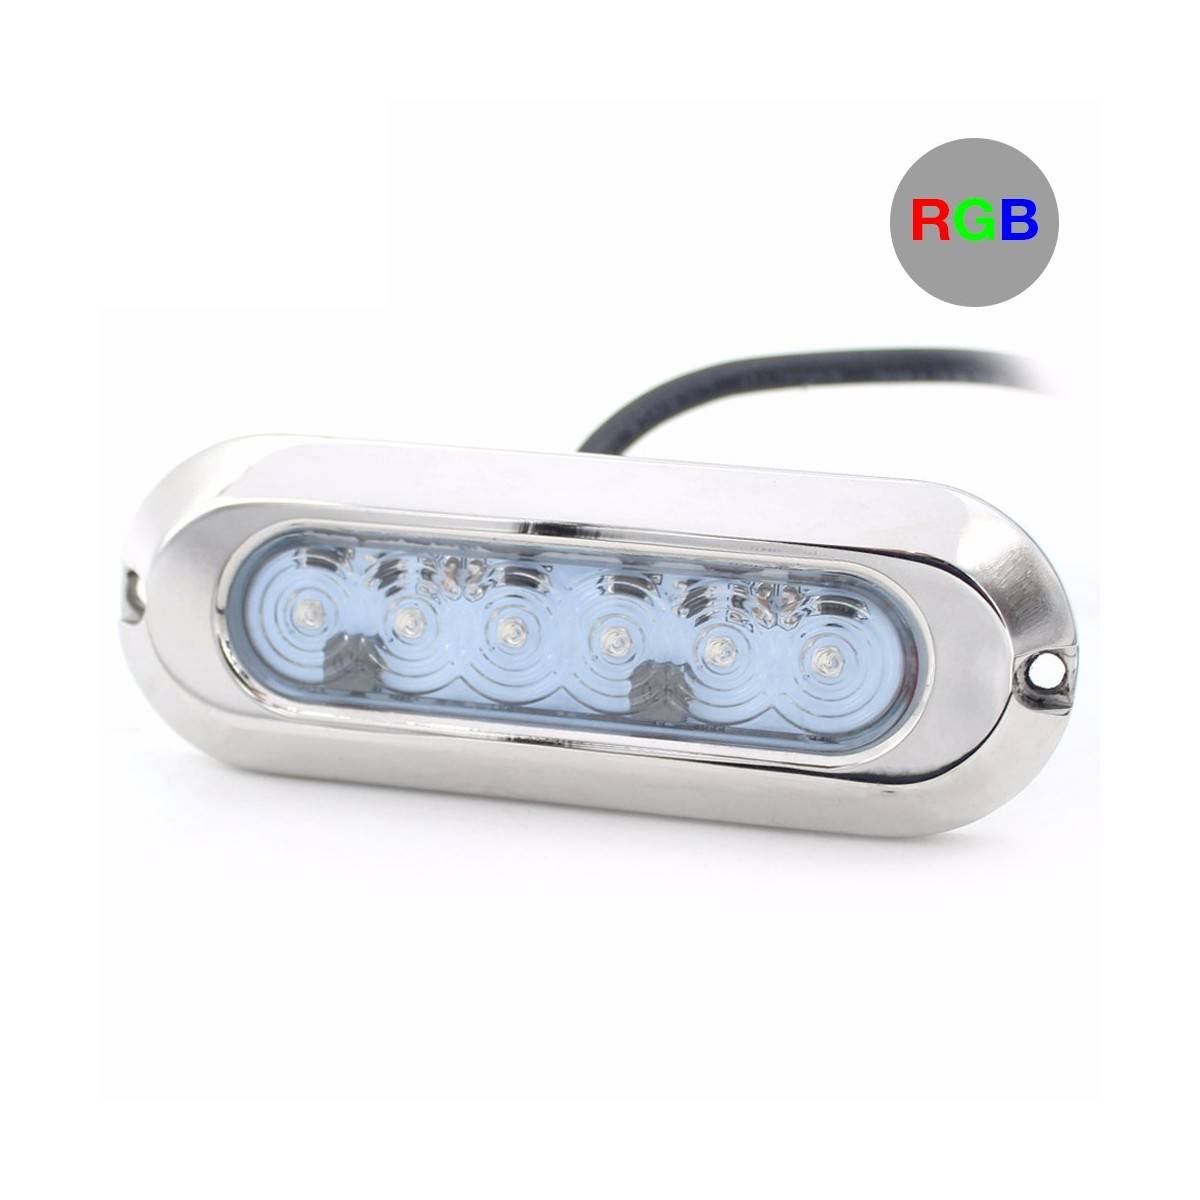 SLIM 30W 12V in acciaio inox 316L IP68 LED RGB montato in superficie a luce sommersa